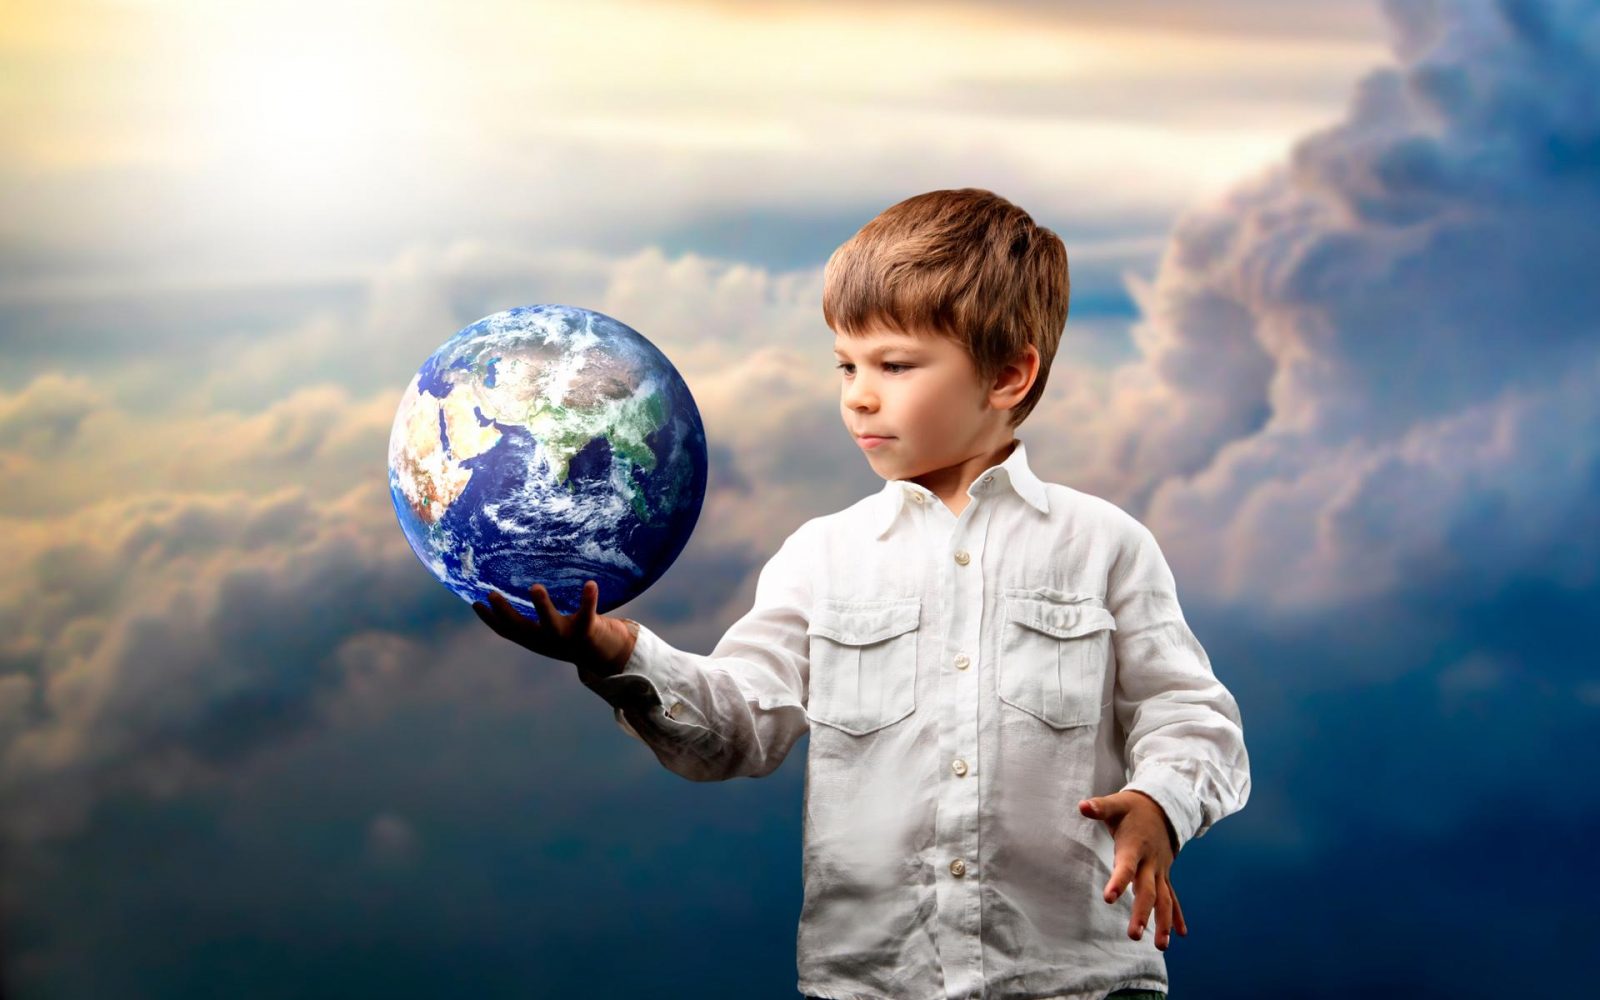 Most People Can’t Answer These Questions from “Who Wants to Be a Millionaire” — Can You? Kid Child Holding Globe Planet Earth World Geography